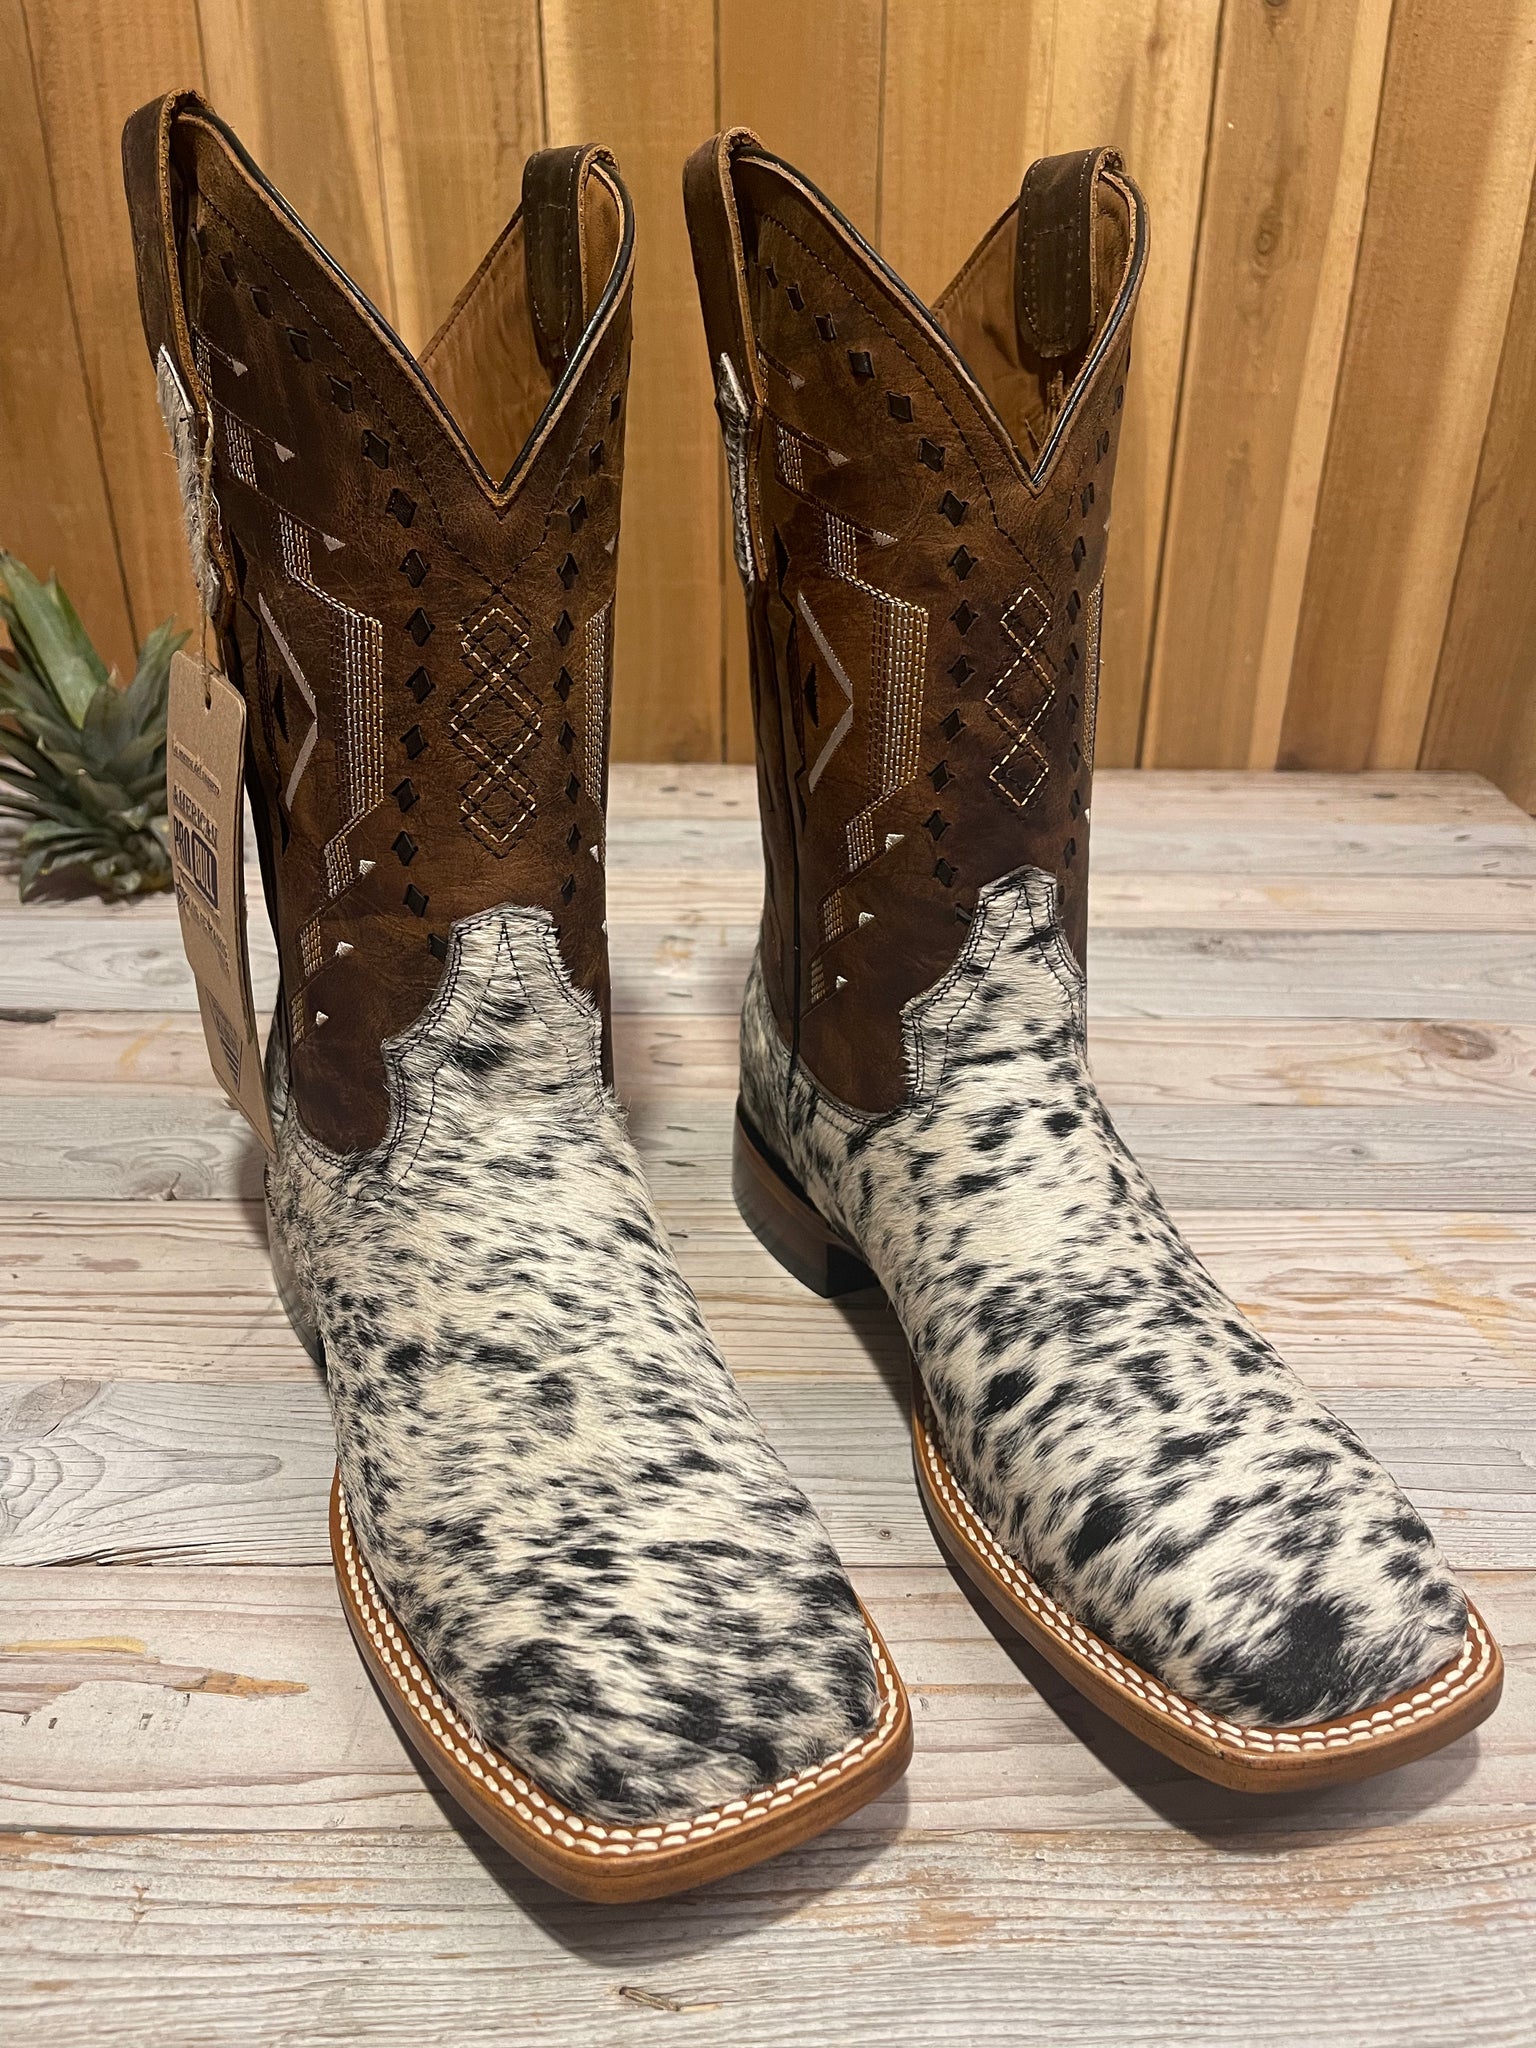 Exotic Leather Boot “Spot” Cowhide  Size 9.5